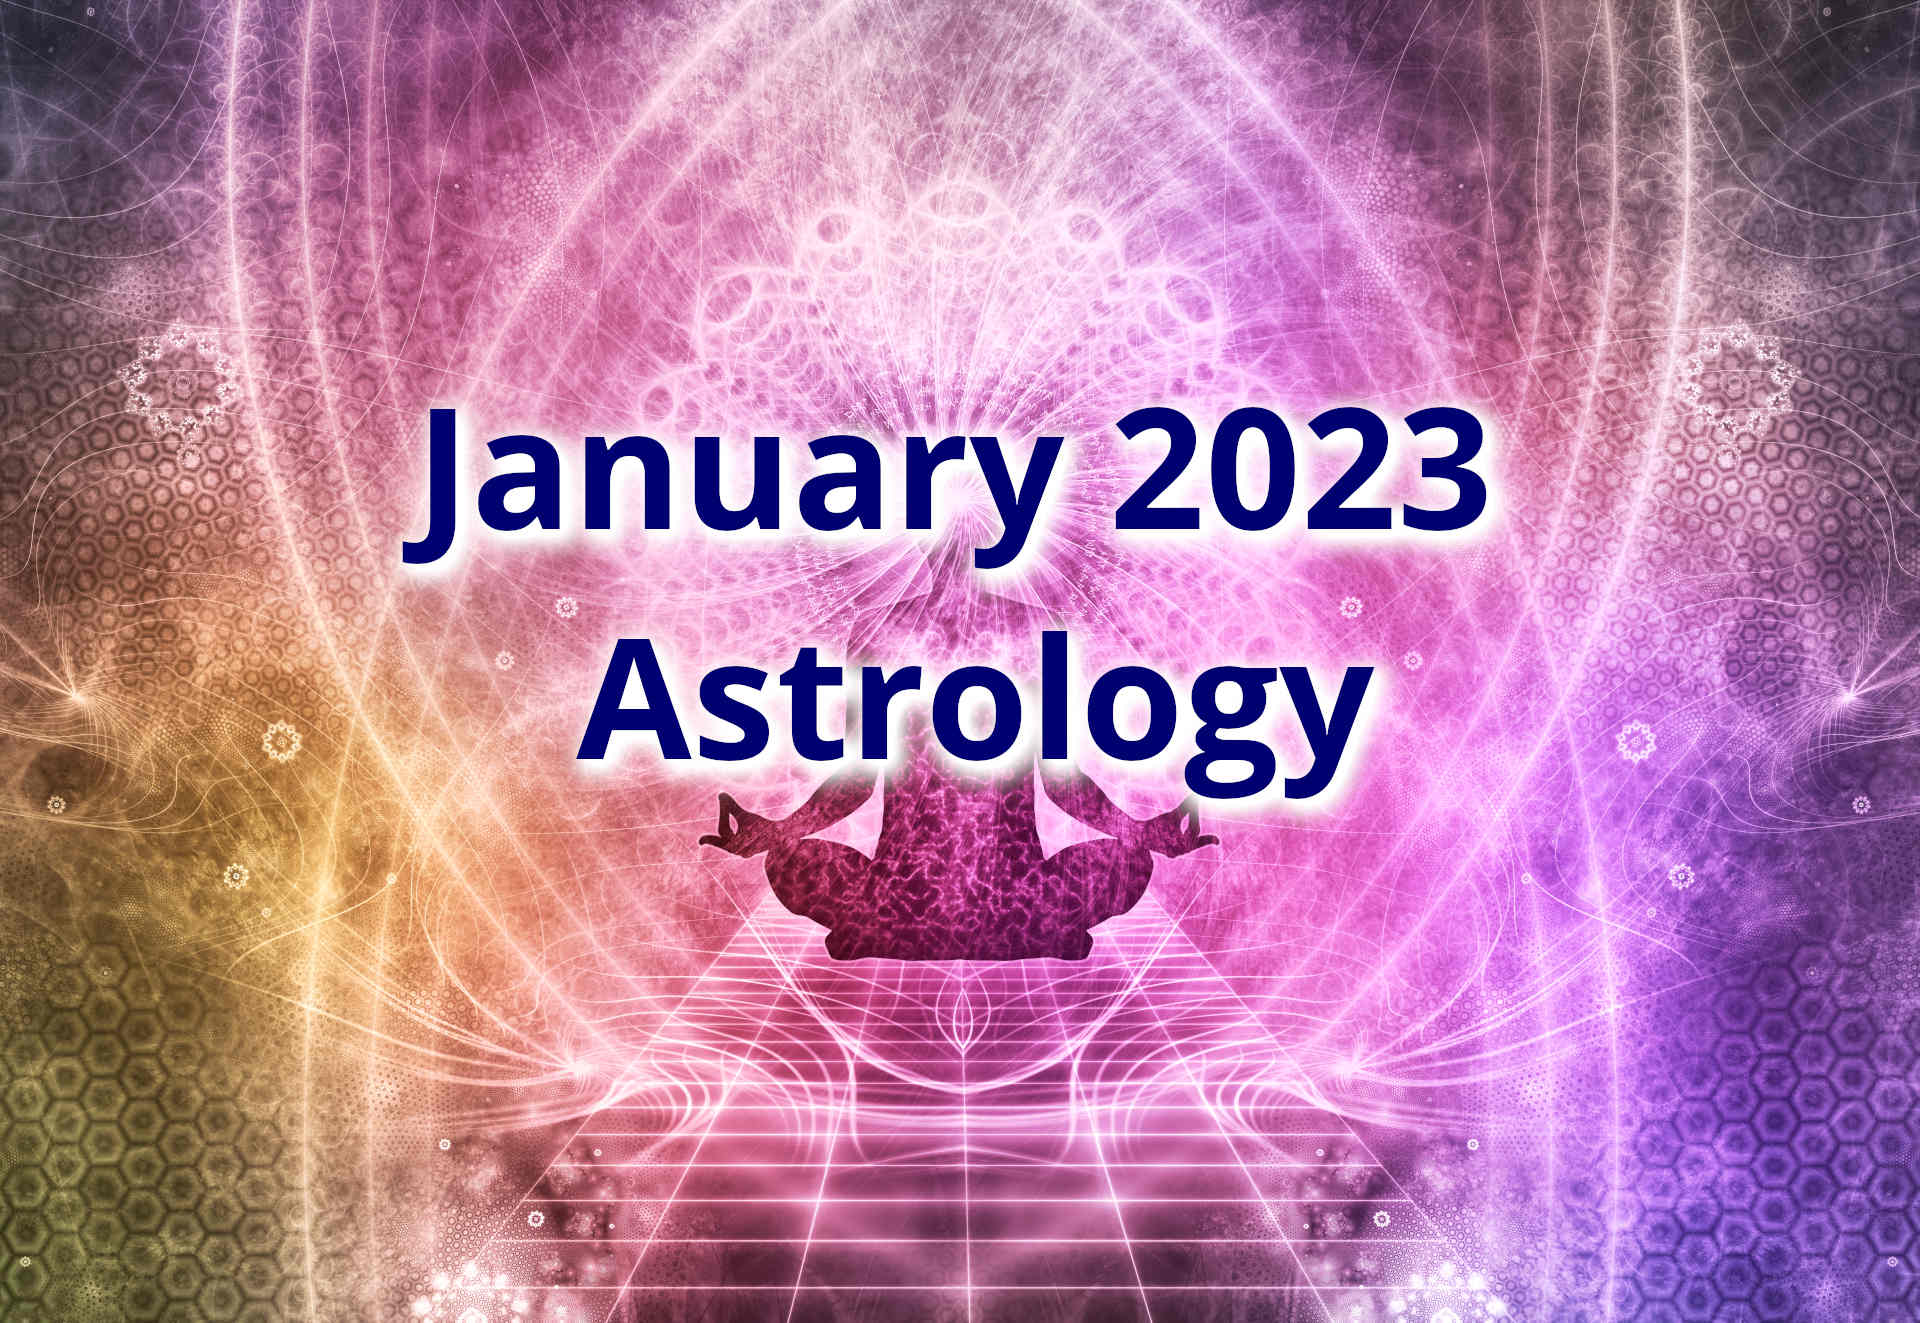 Astrology for 2023 and January Predictions